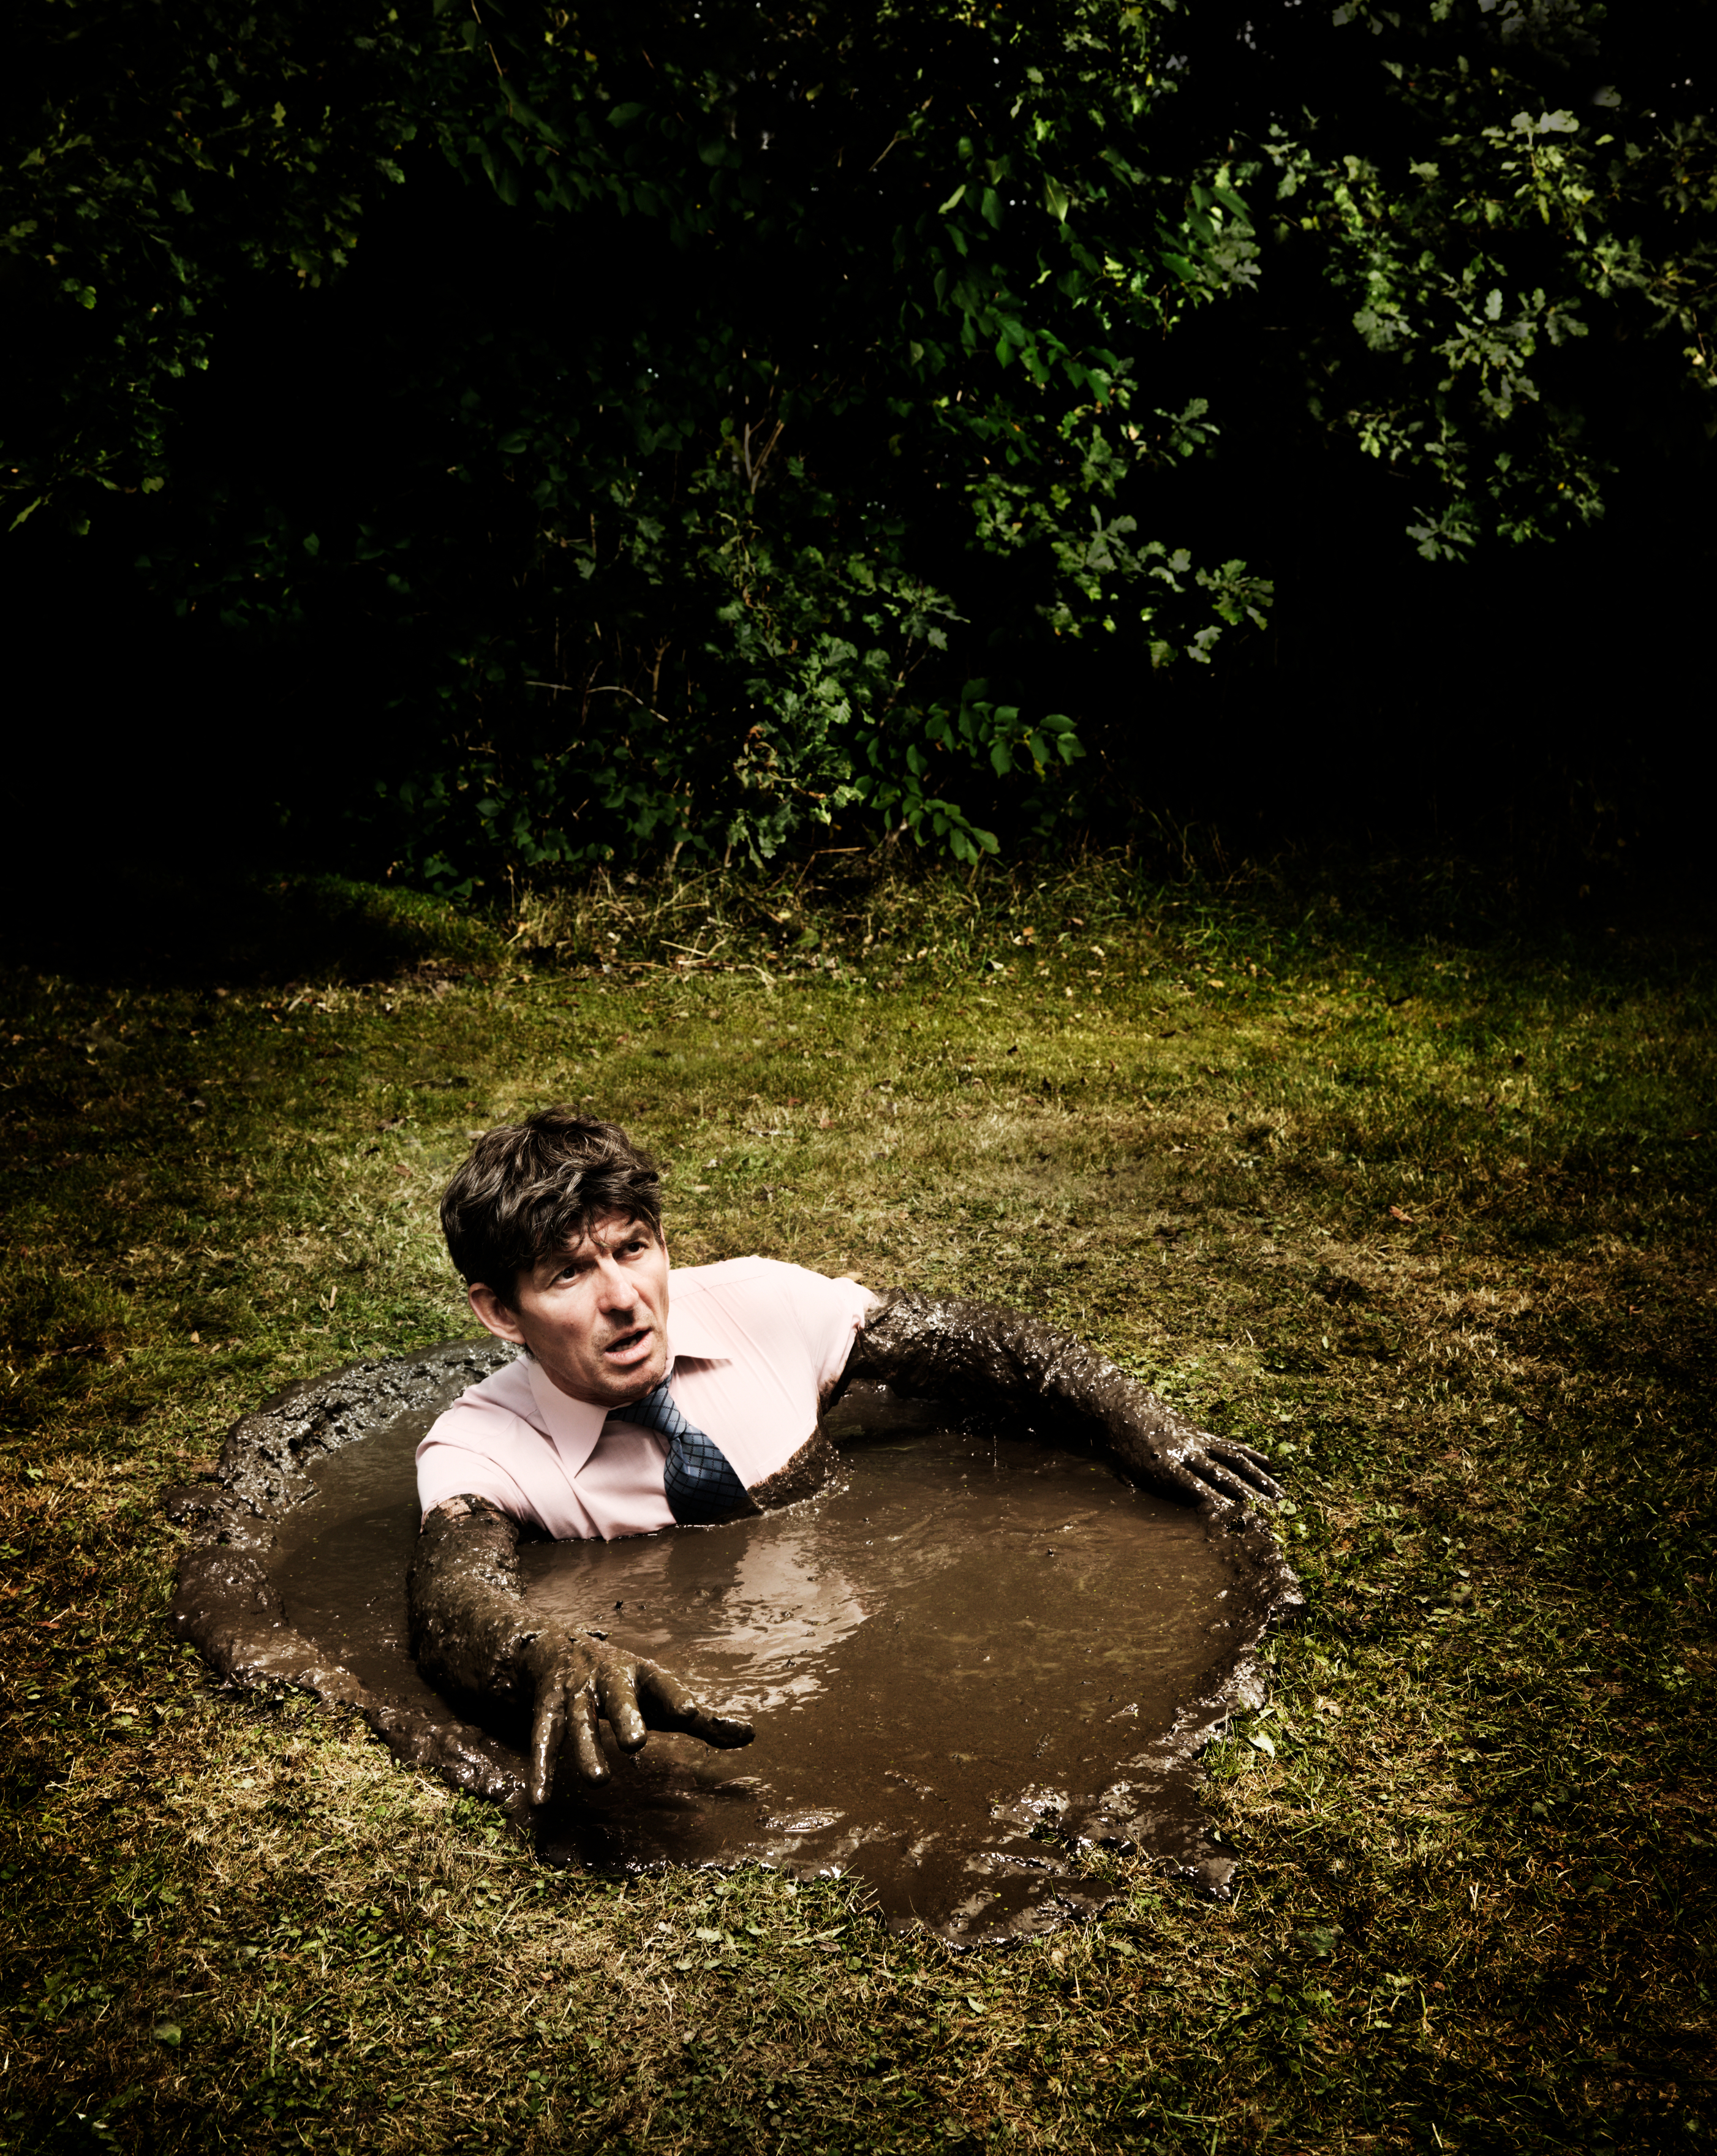 A man in a large puddle